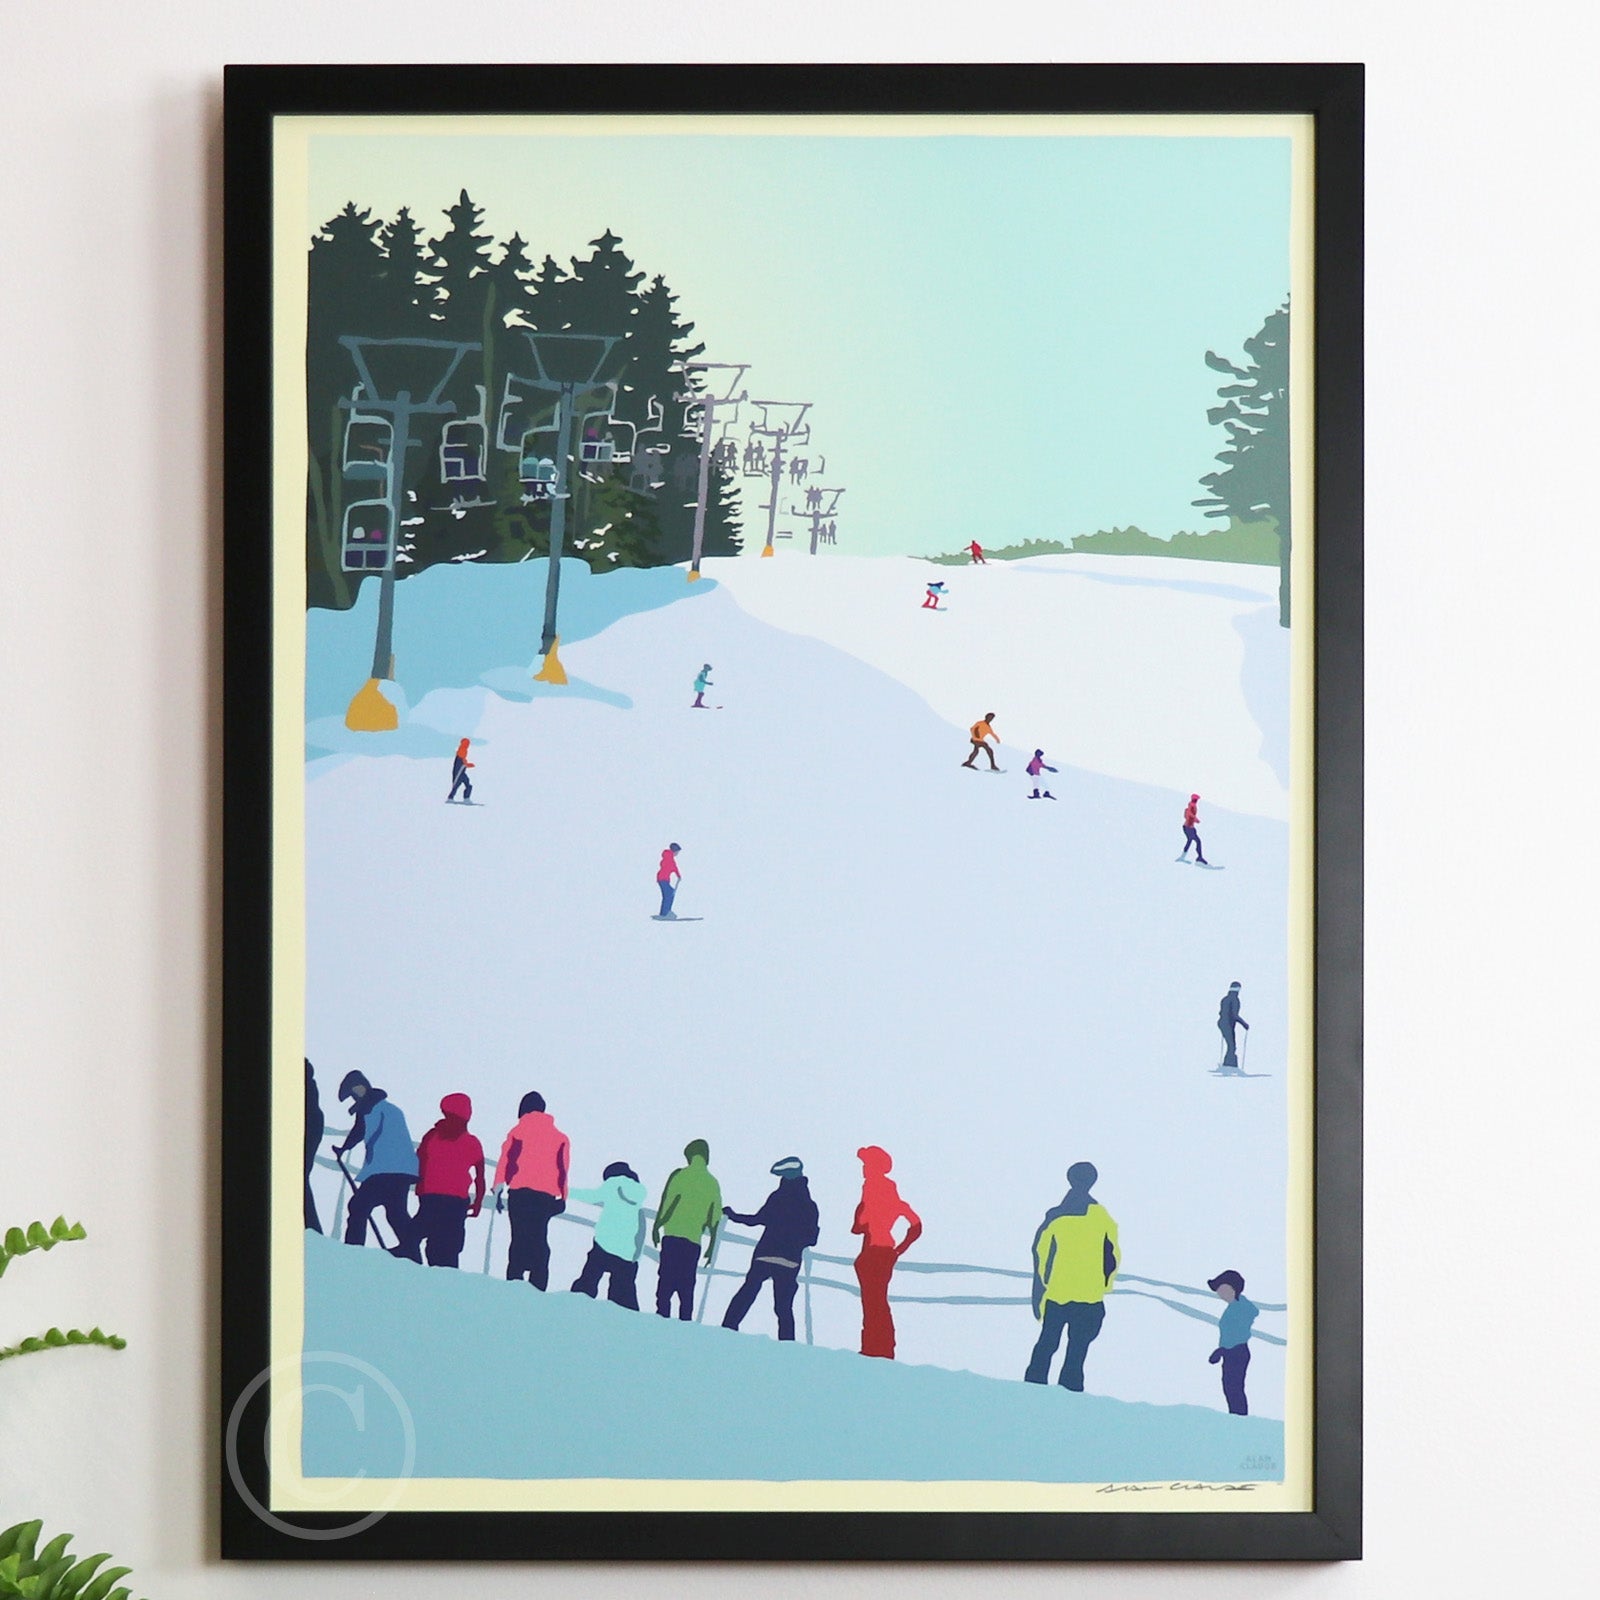 Skiing Snow Bowl Art Print 18" x 24" Framed Wall Poster By Alan Claude - Maine